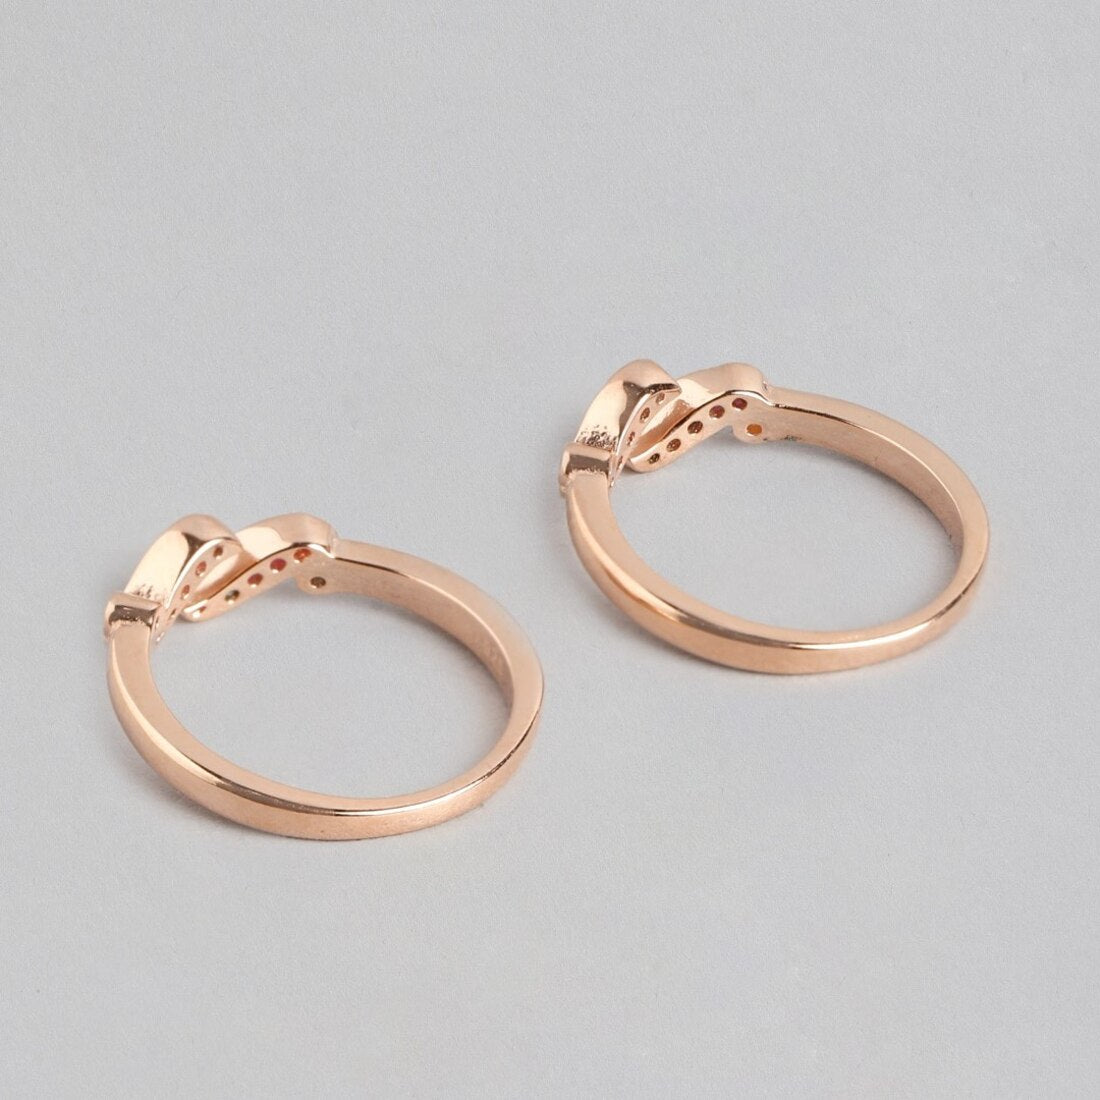 Glistening Rose Gold Plated 925 Sterling Silver Cubic Zirconia Toe Ring